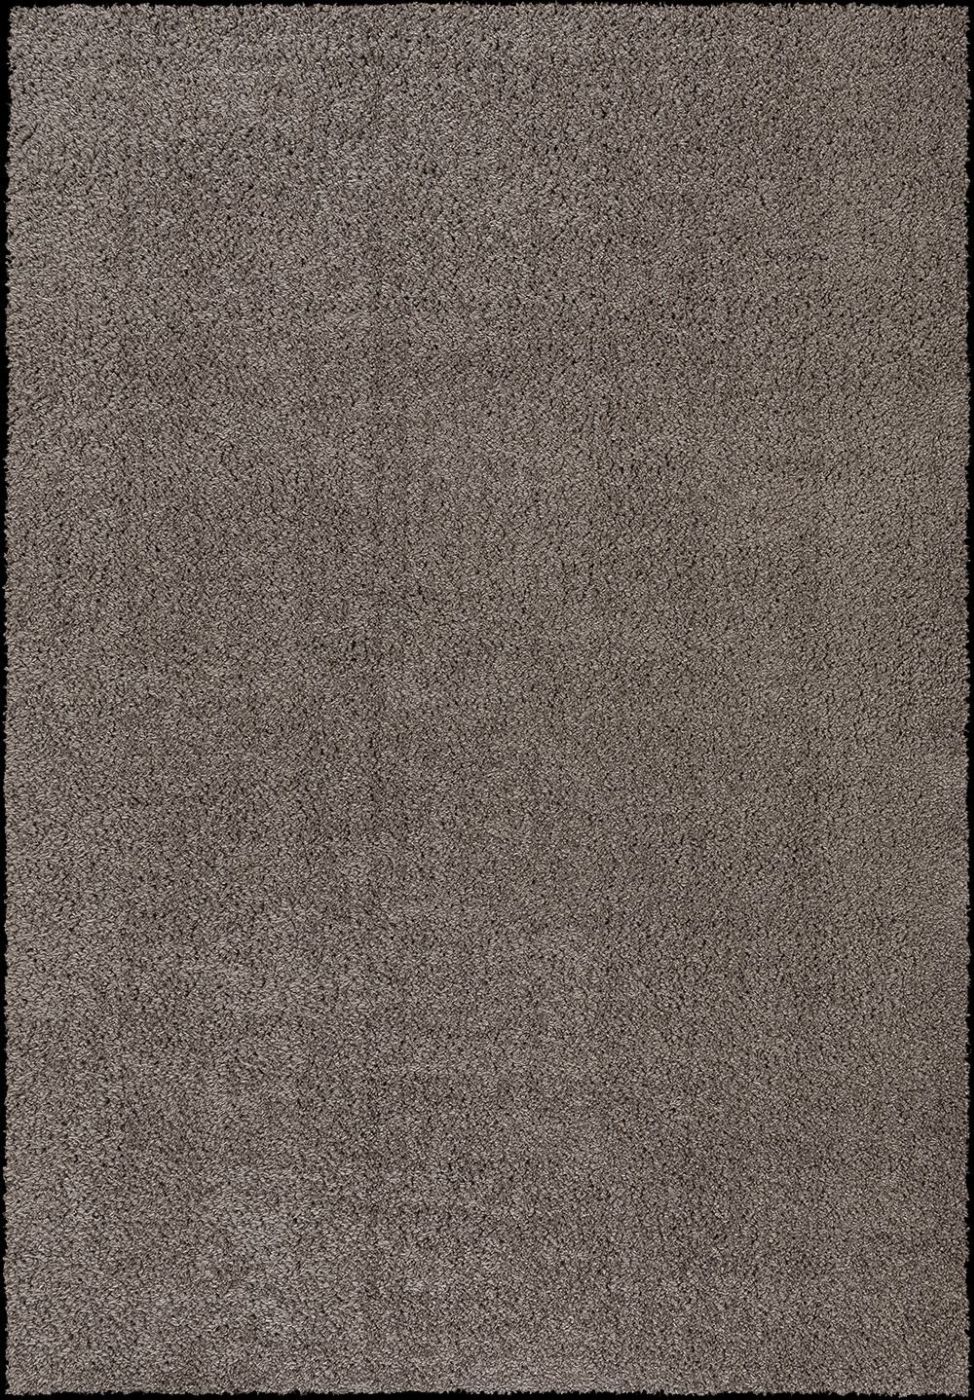 Teppich Queens 80 x 150 cm in taupe